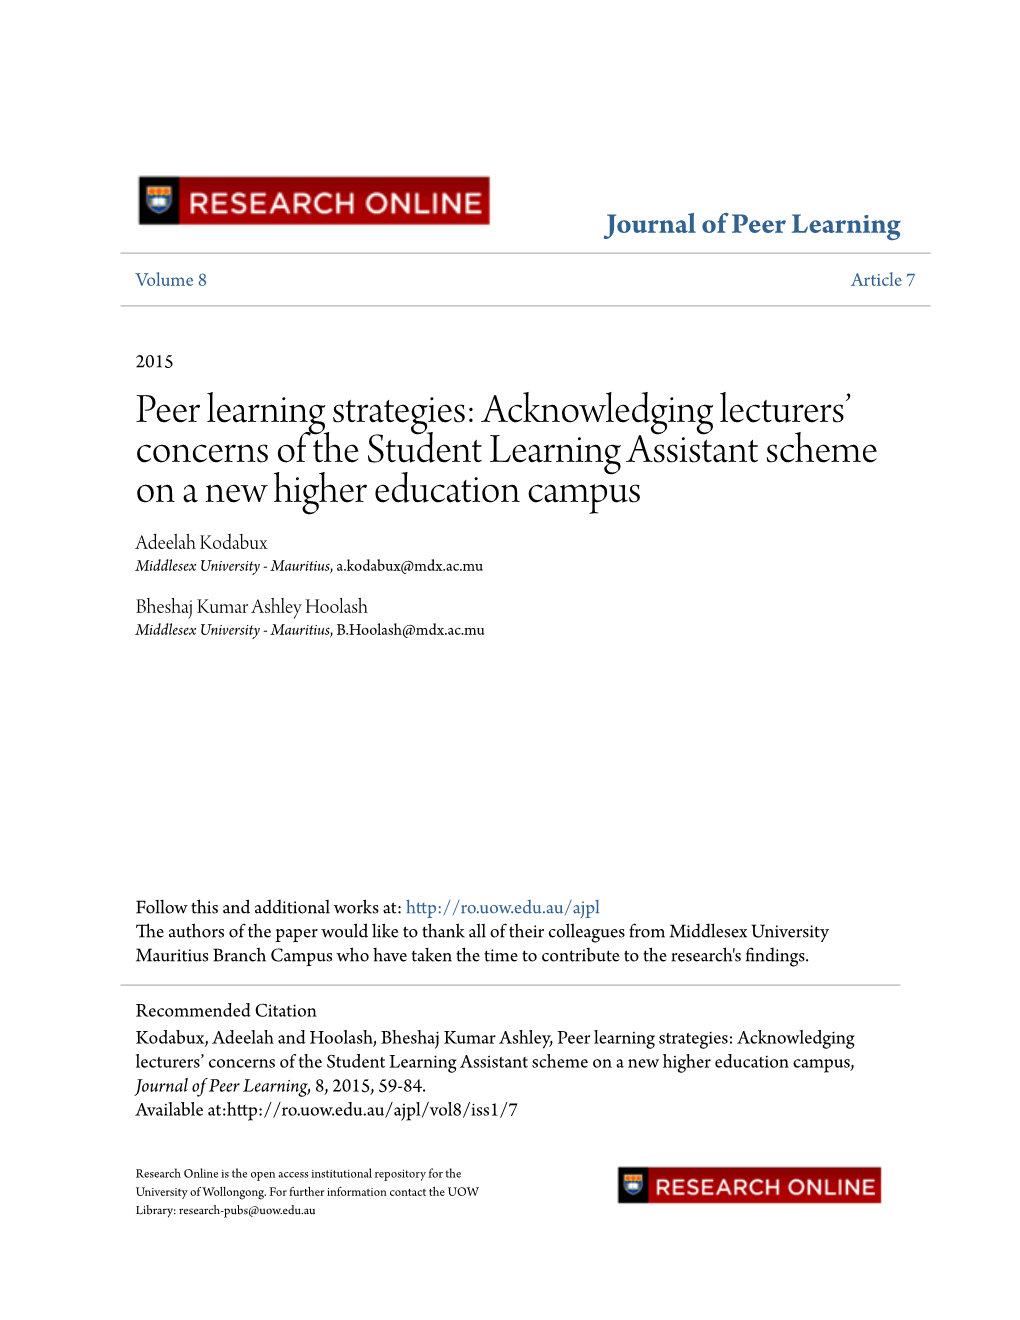 Peer Learning Strategies: Acknowledging Lecturers' Concerns of the Student Learning Assistant Scheme on a New Higher Education